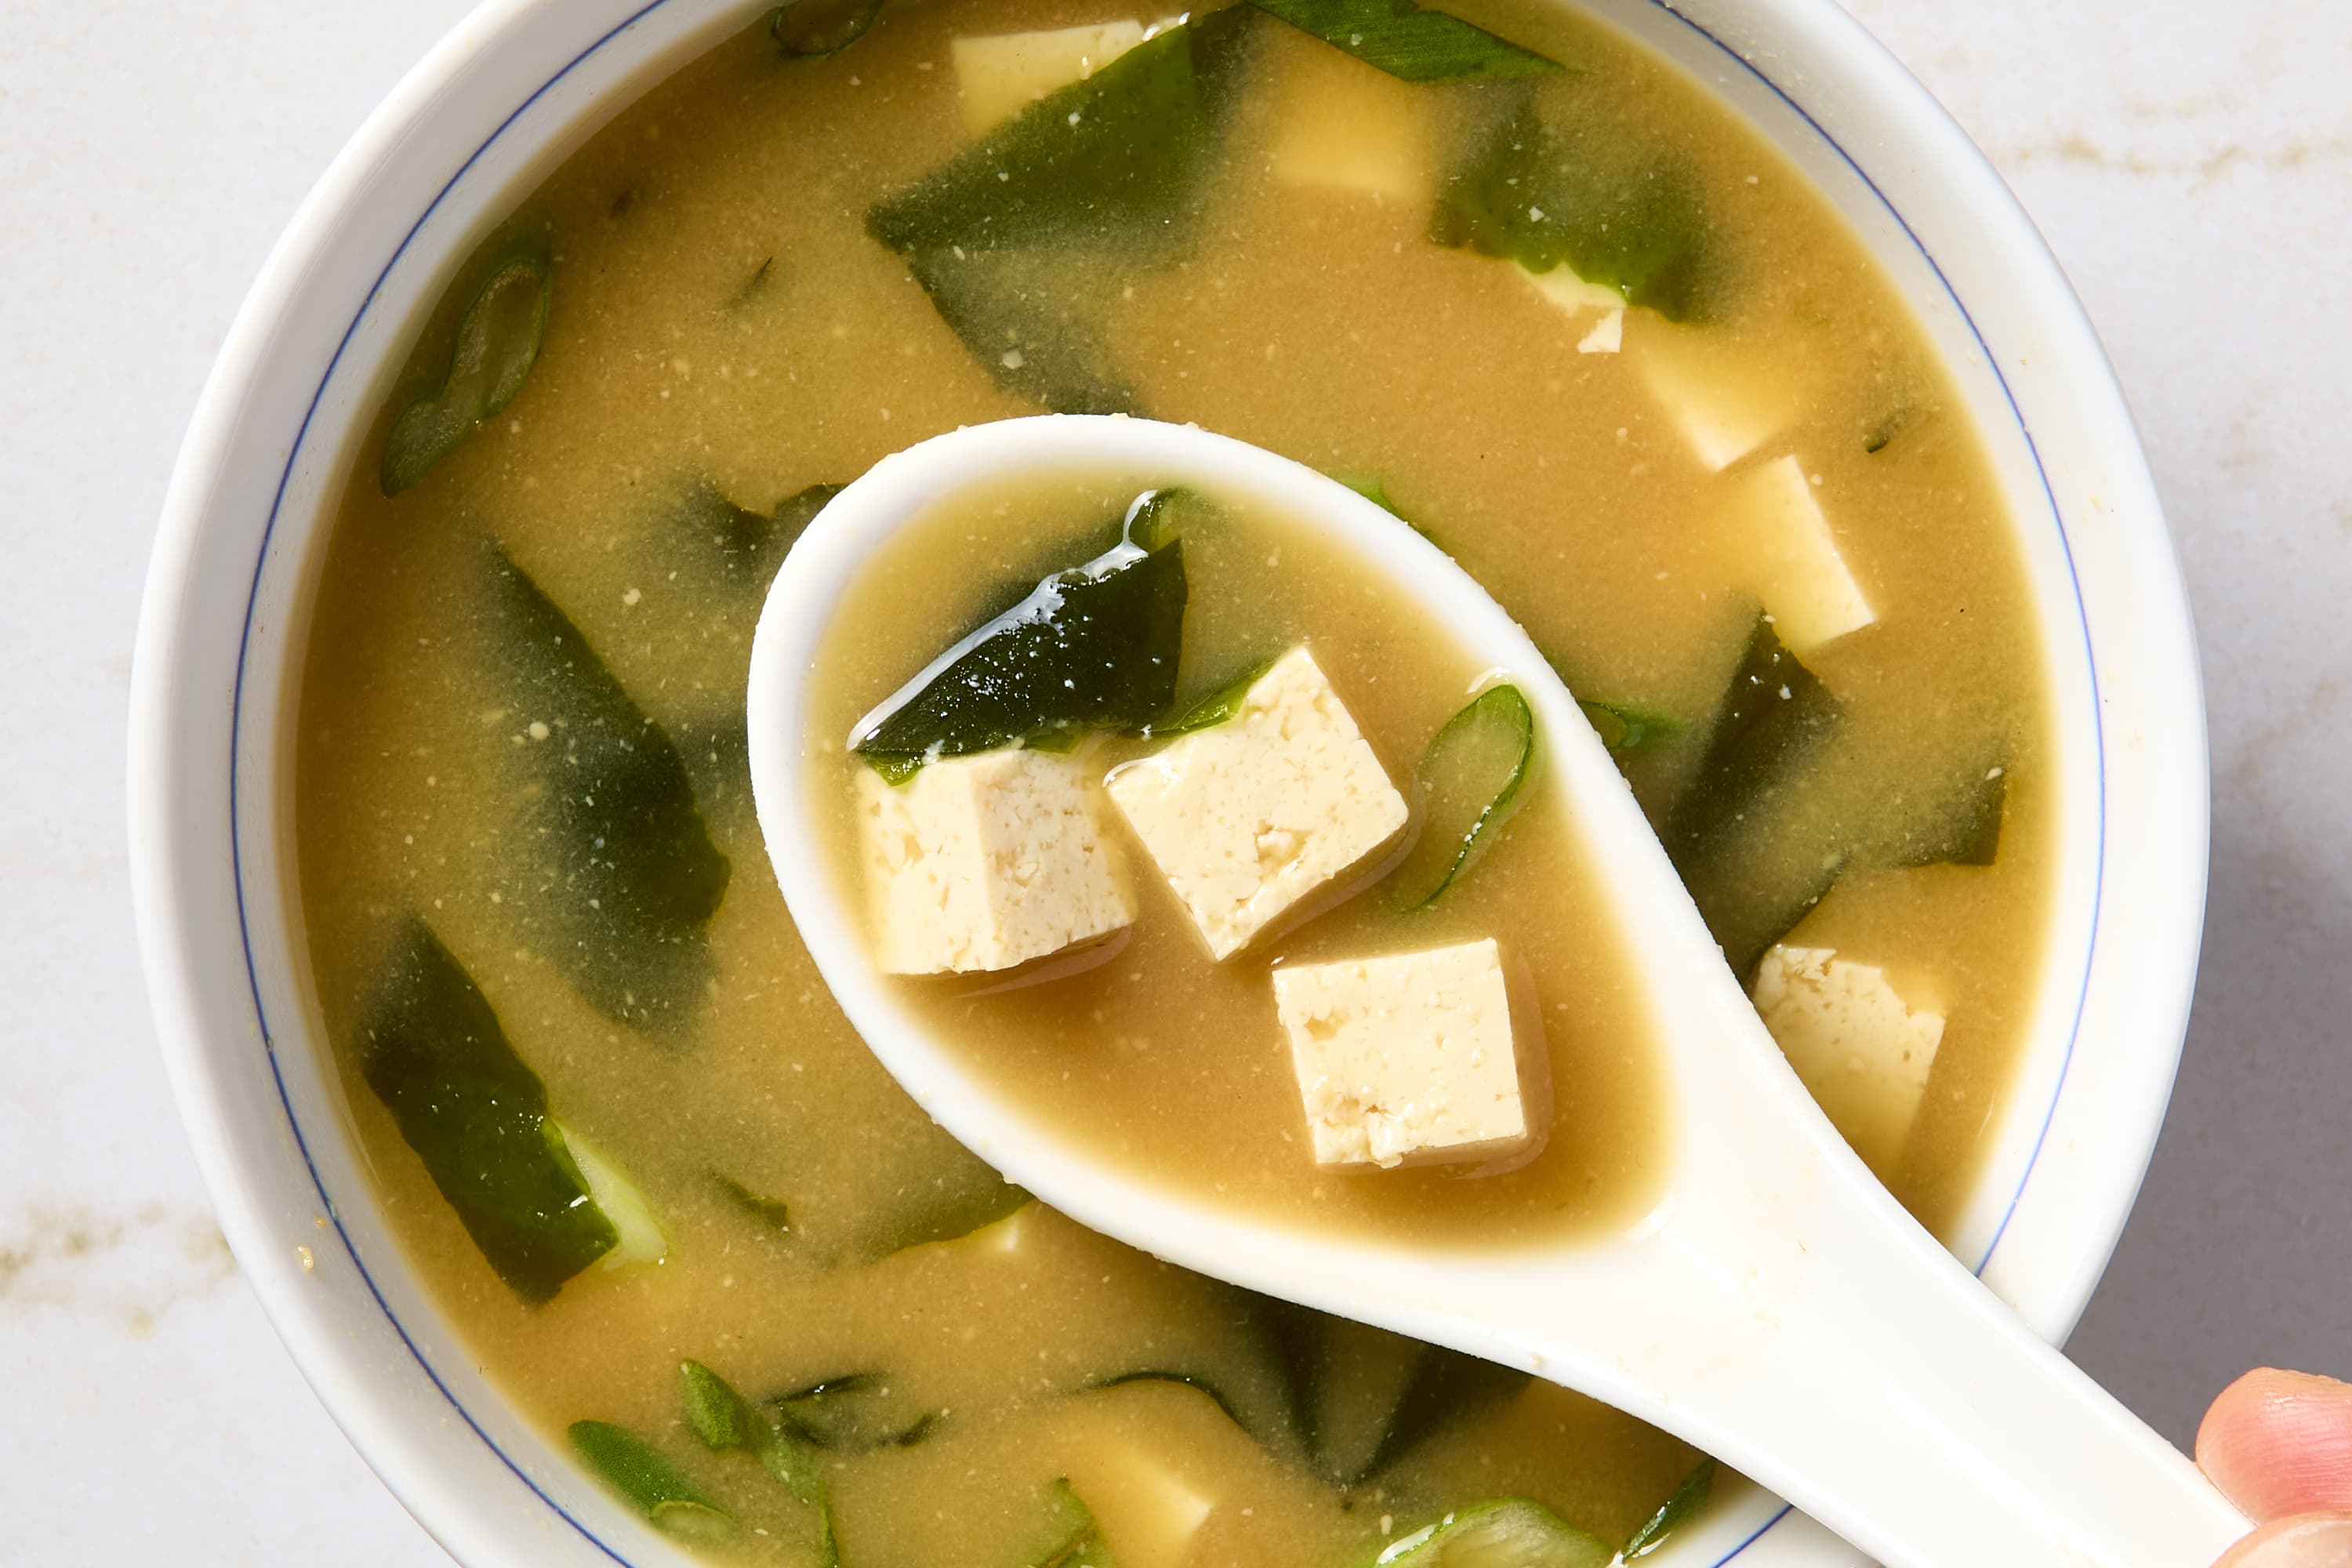 Authentic Homemade Japanese Miso Soup